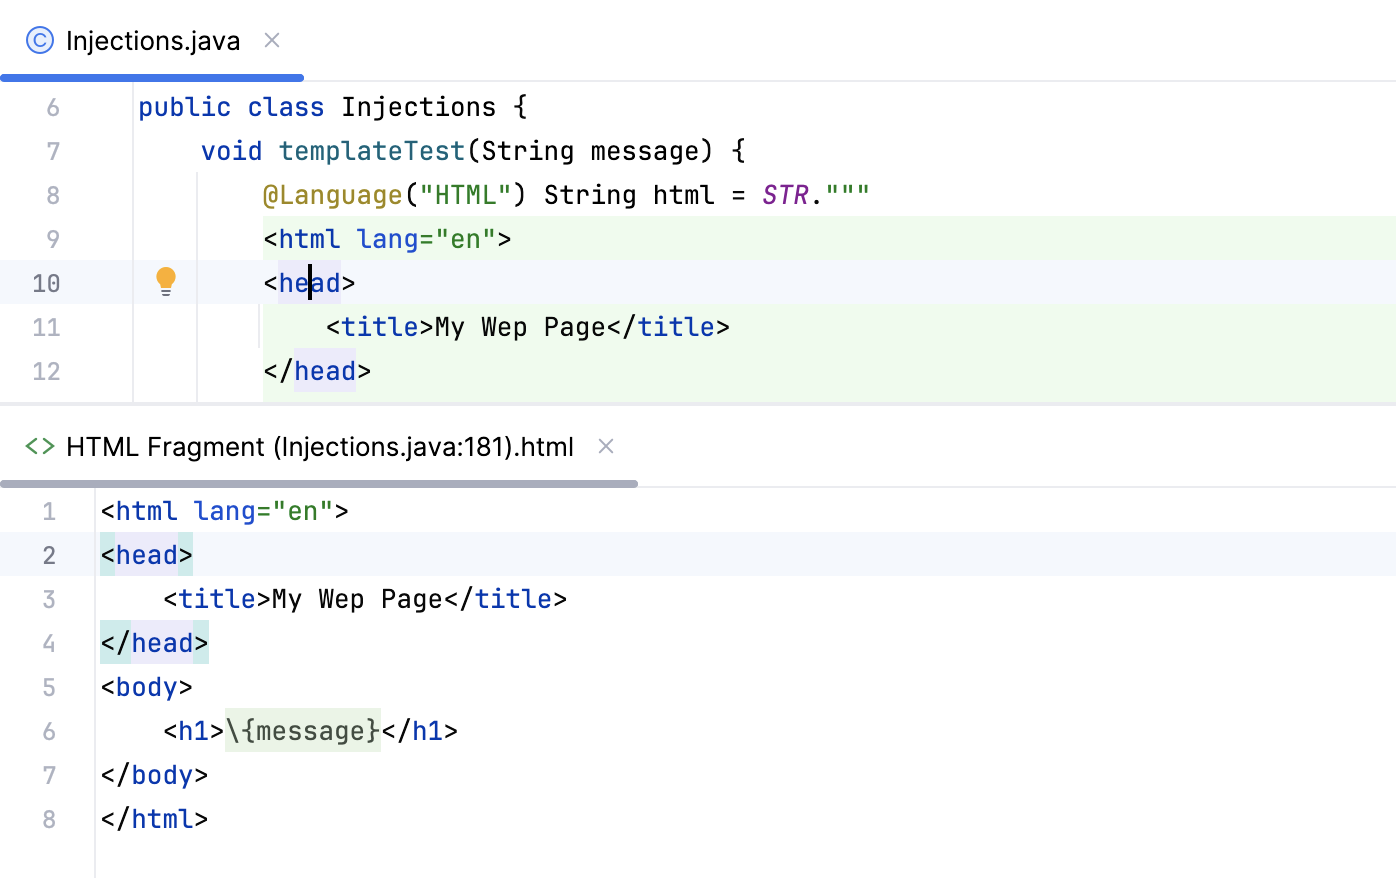 Editing the injected code fragment in the dedicated editor